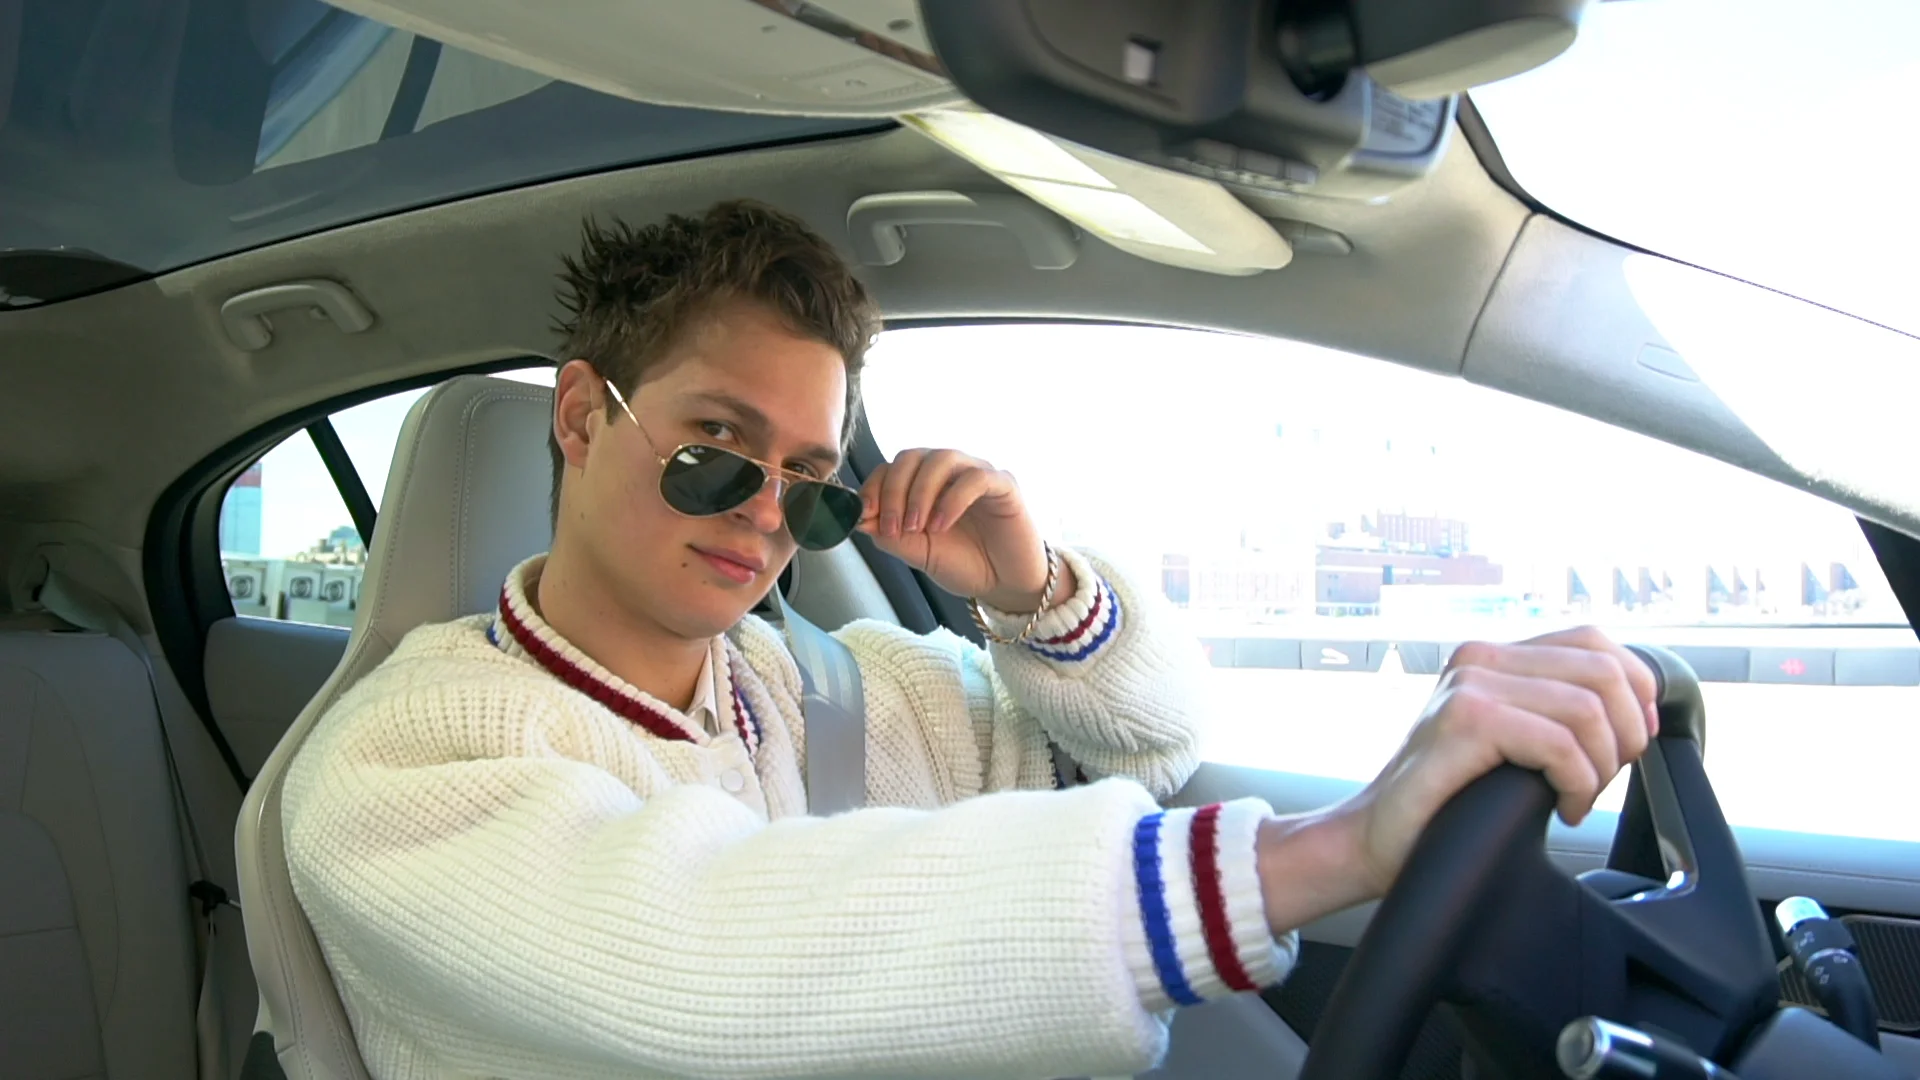 BABY DRIVER' ANSEL ELGORT TESTS SKILL IN ELECTRIC JAGUAR I-PACE